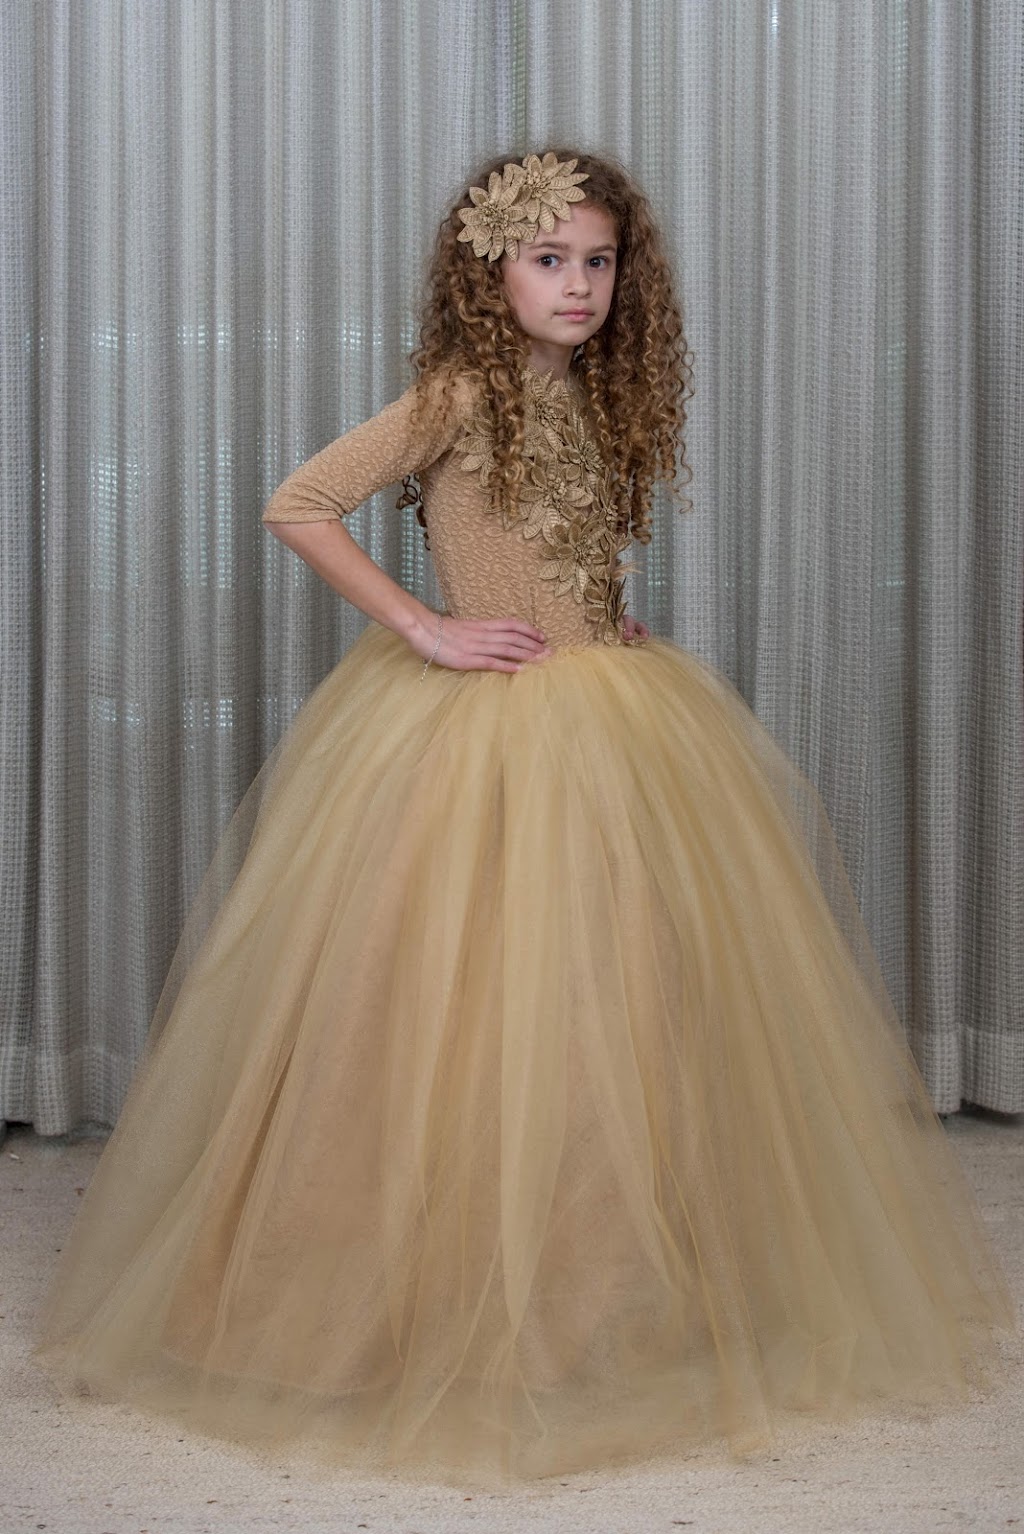 Tunza Tulle Childrens Gowns | 1880 Morris Ave, Union, NJ 07083 | Phone: (347) 898-4000